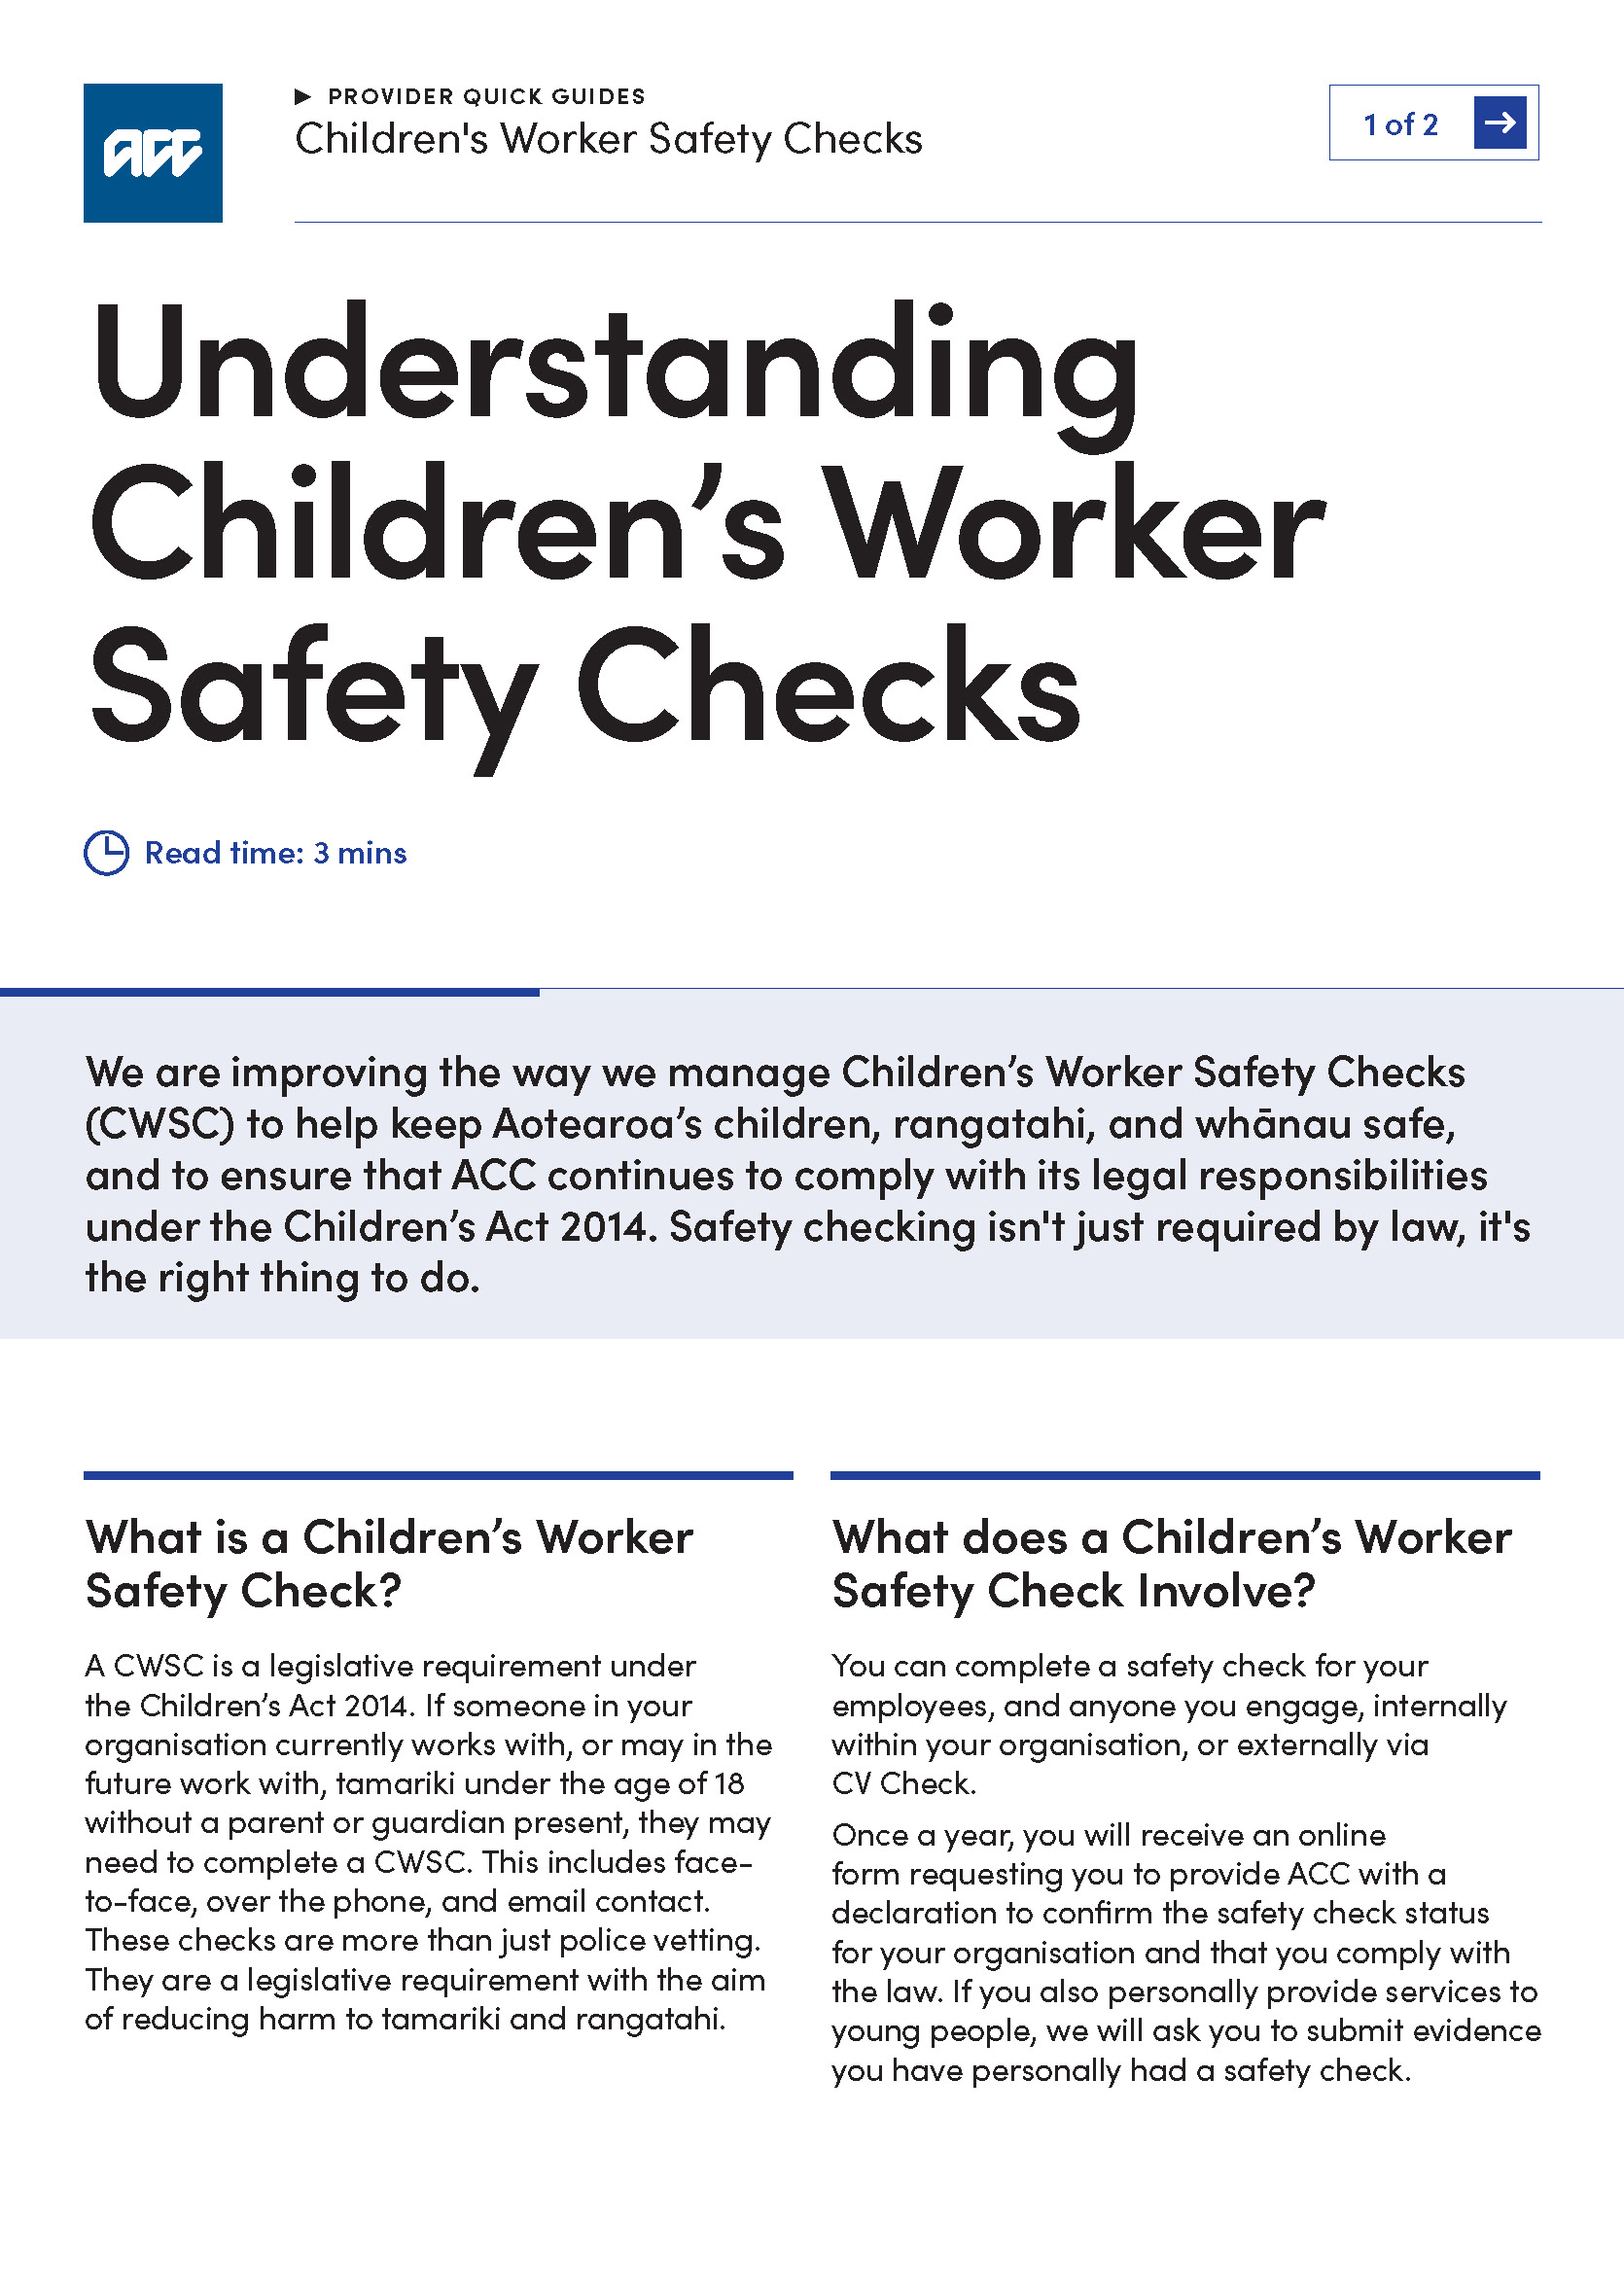 Cover page of children's worker safety check quick guide